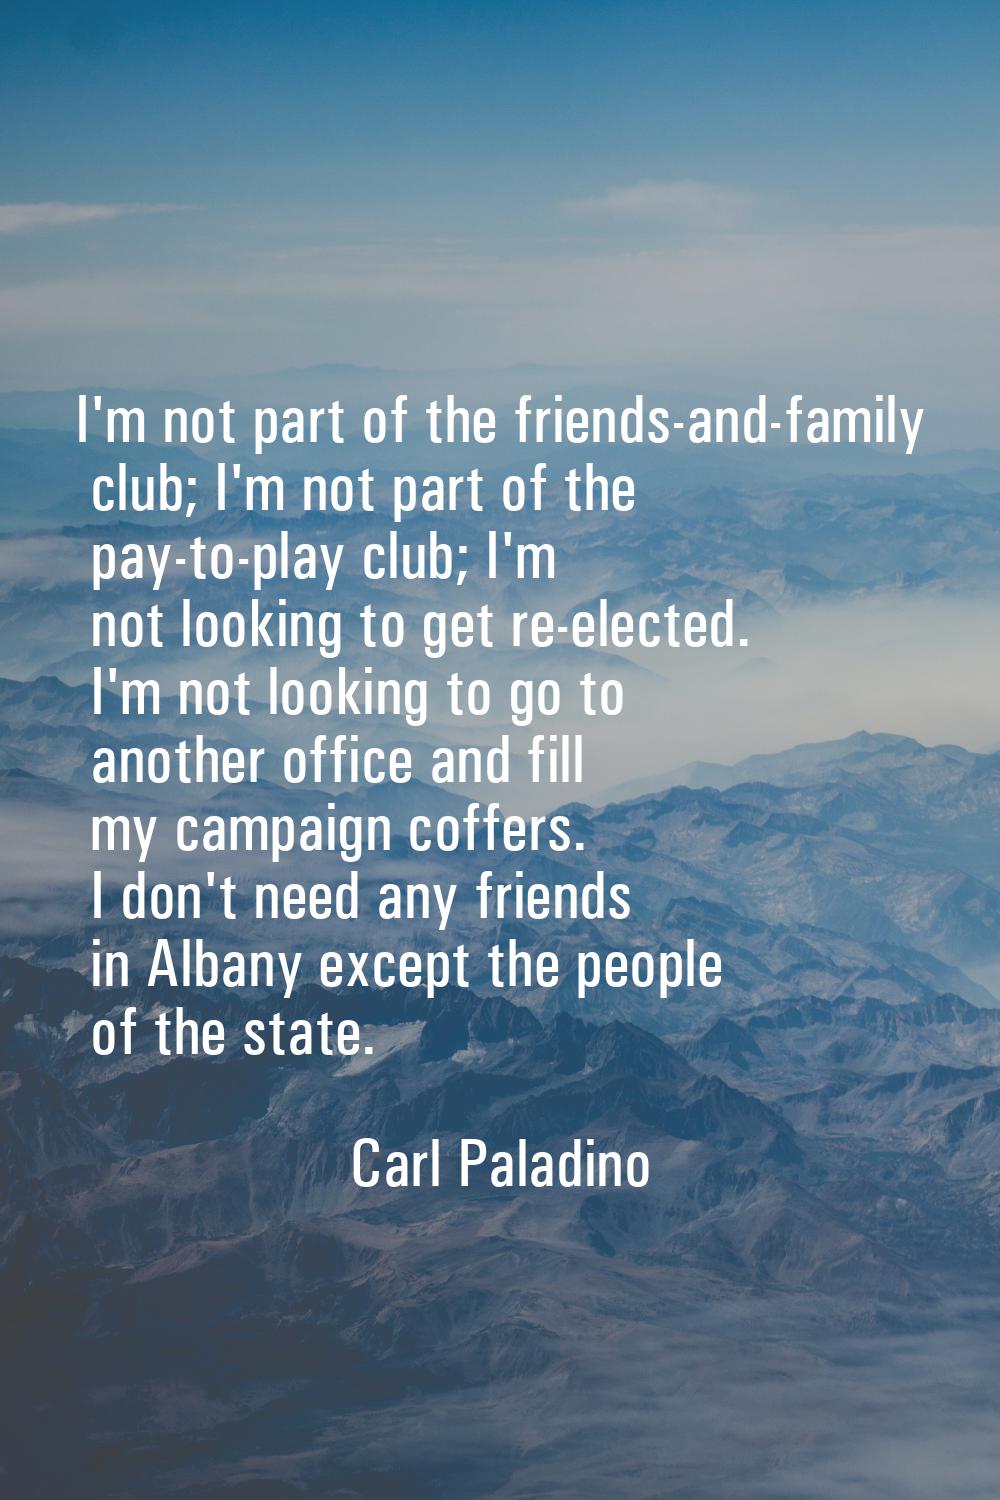 I'm not part of the friends-and-family club; I'm not part of the pay-to-play club; I'm not looking 